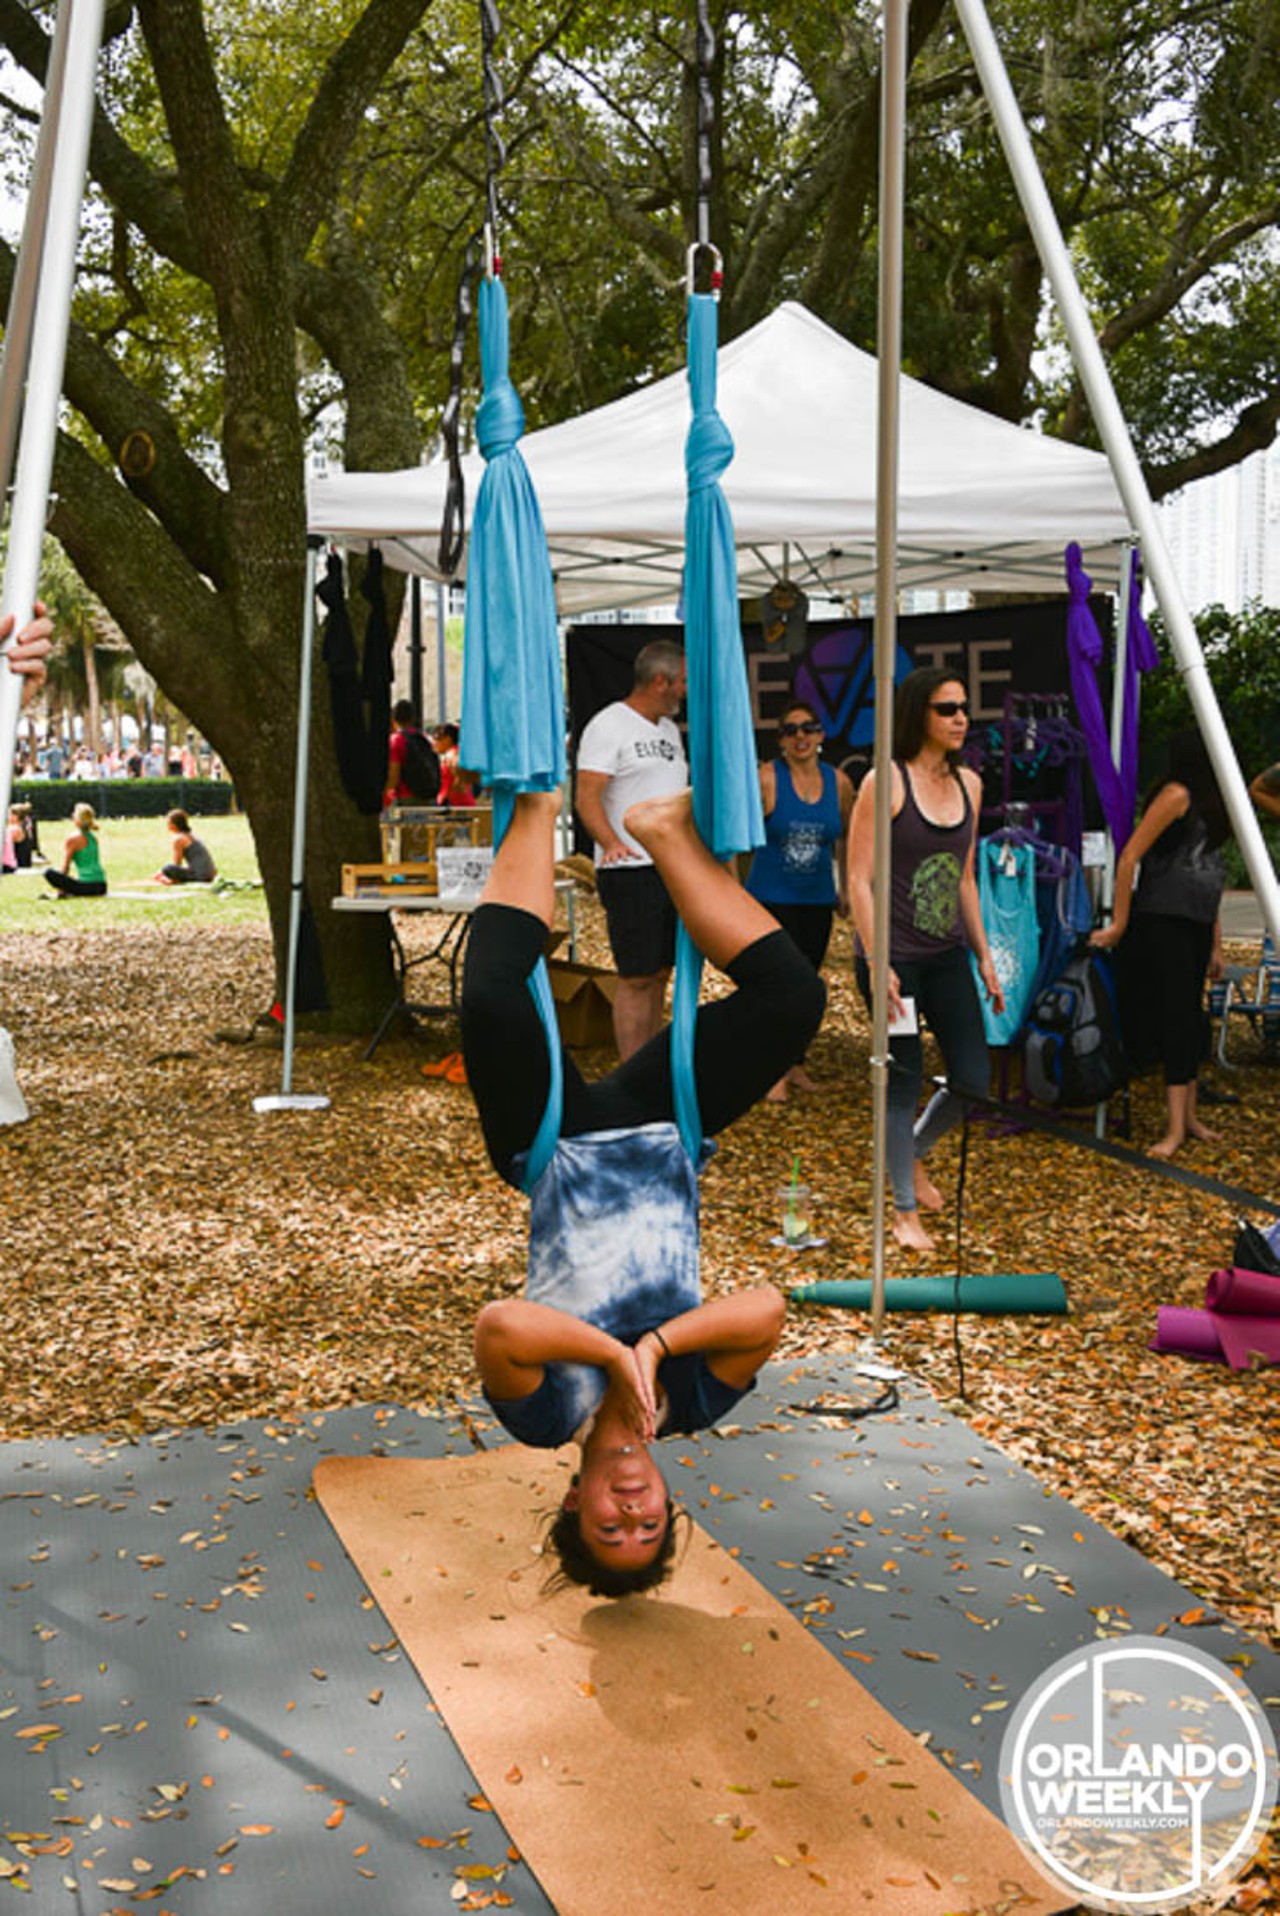 54 photos from It's Just Yoga Festival at Lake Eola Park